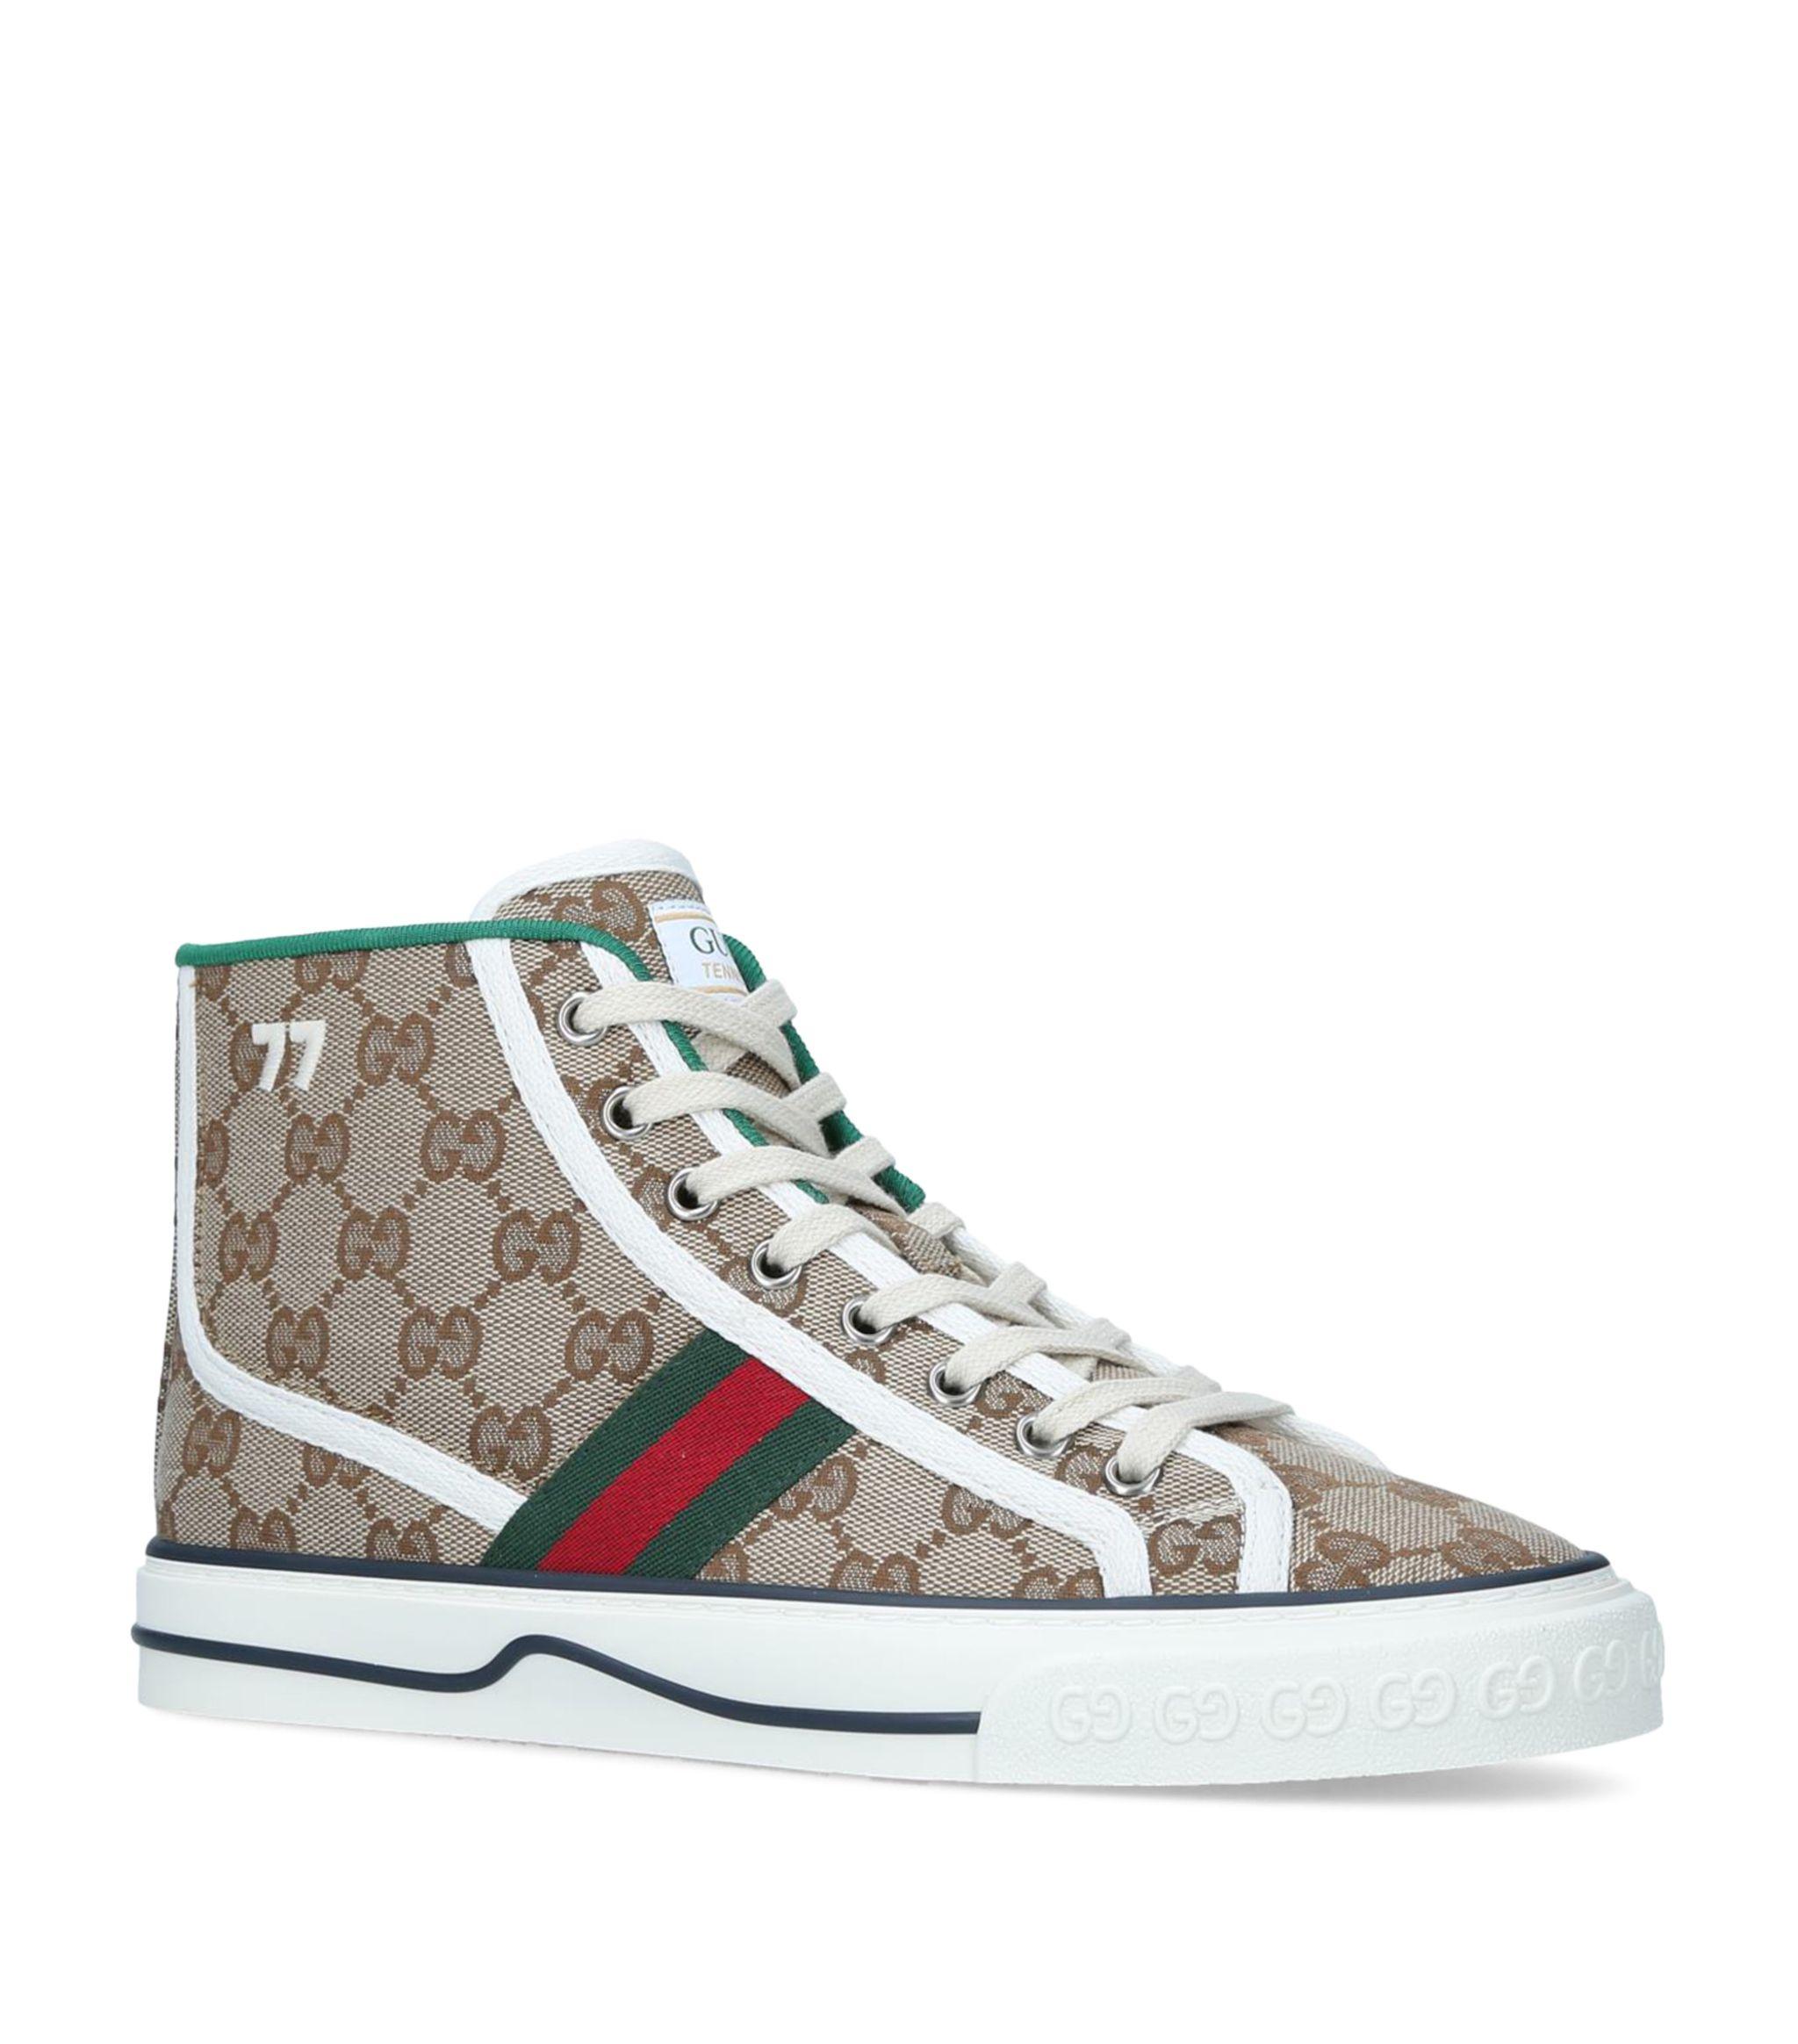 Gucci Canvas Tennis 1977 High Top Sneaker in Beige (Natural) - Save 21% ...